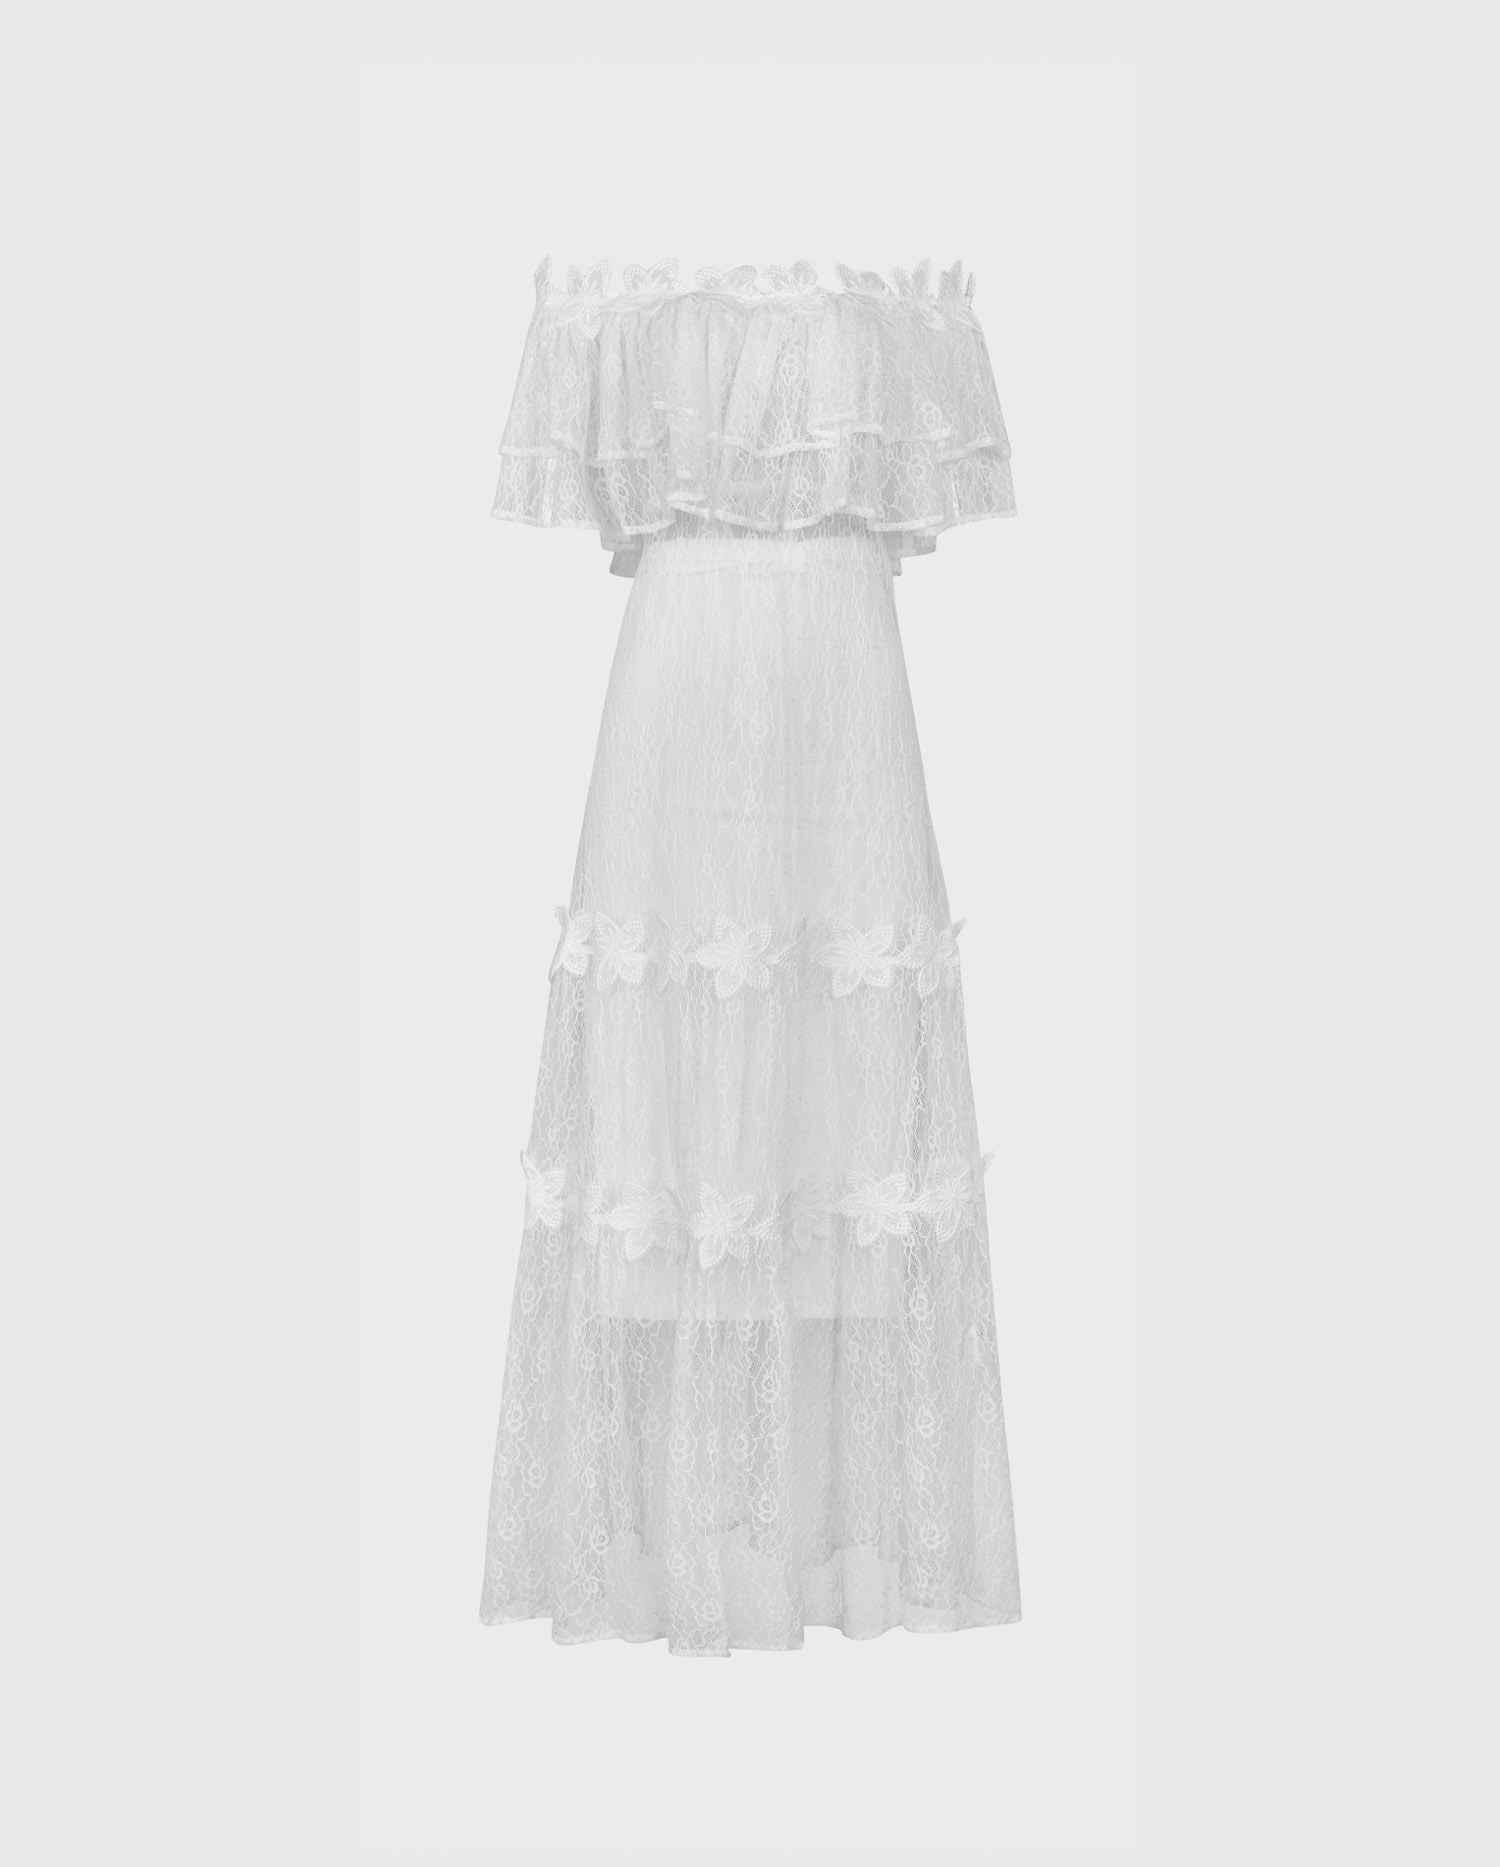 Discover the ALOHA White Off the Shoulder Lace Maxi Dress with Lace Flower Details